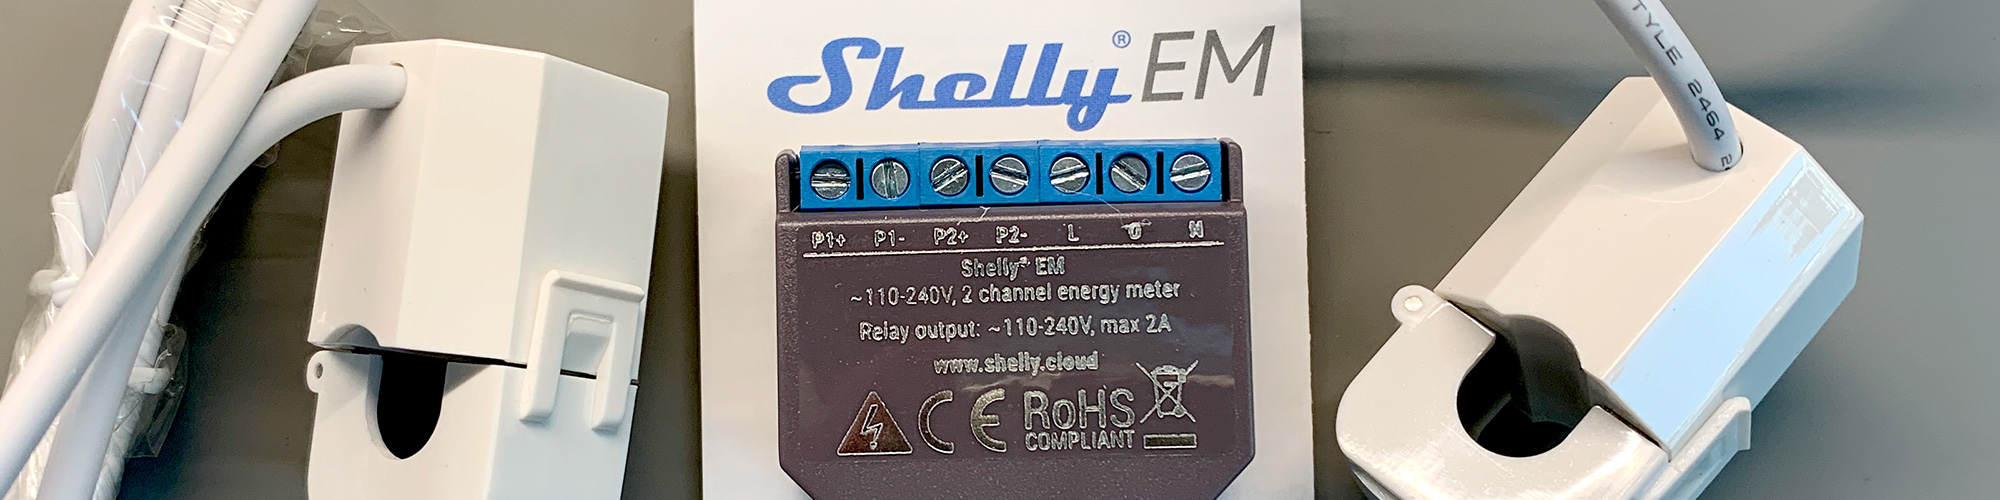 Shelly EM Power Logging with Home Assistant